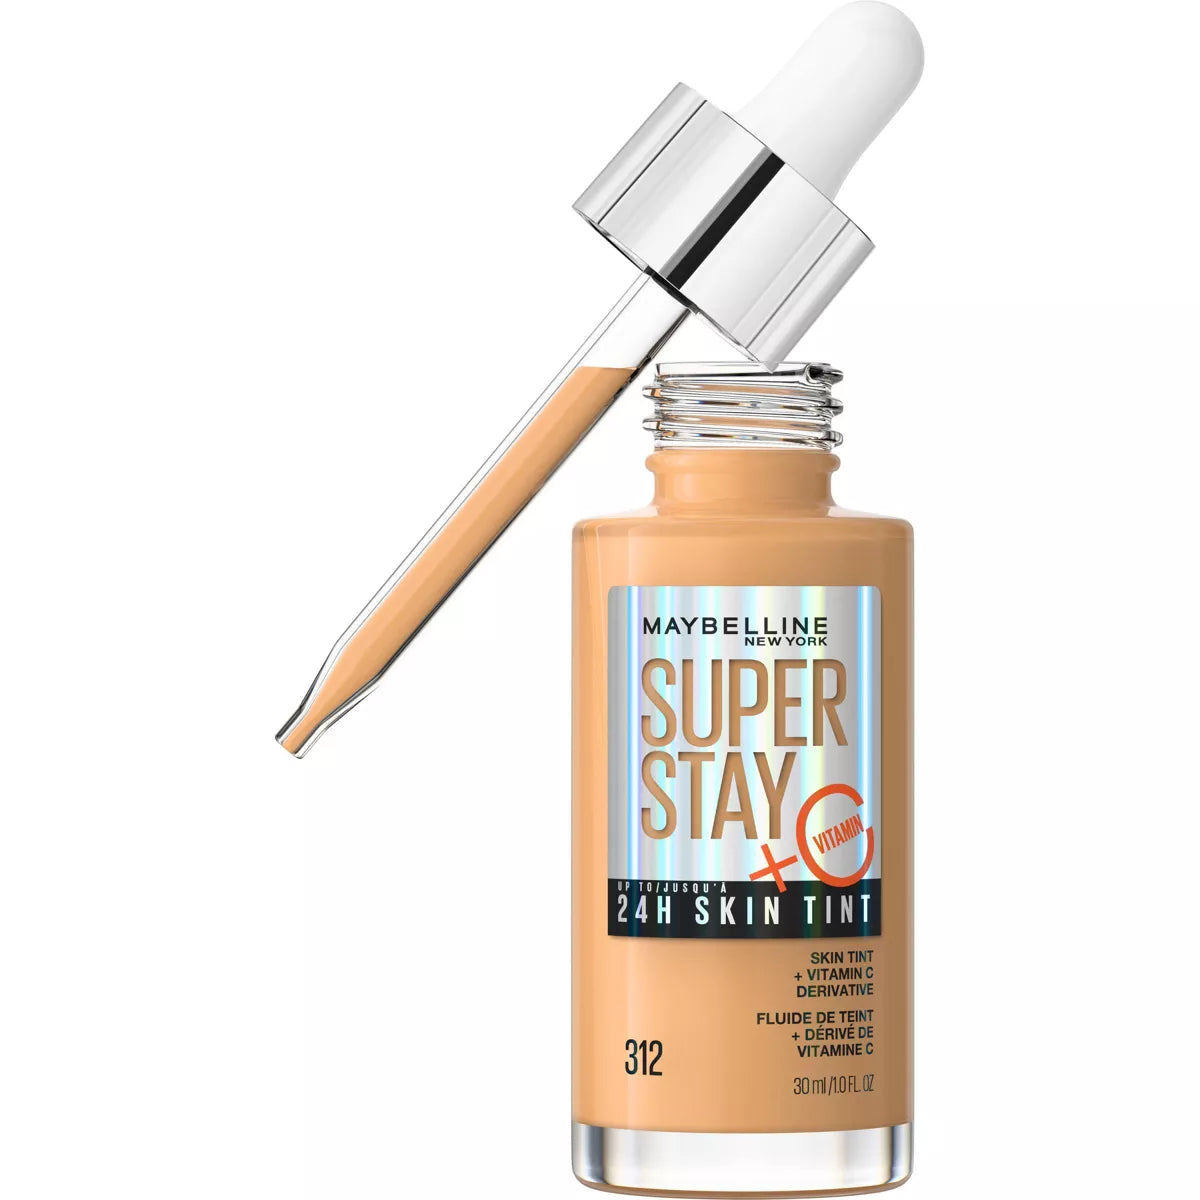 Maybelline - Super Stay 24HR Skin Tint Foundation with Vitamin C | Base de Maquillaje